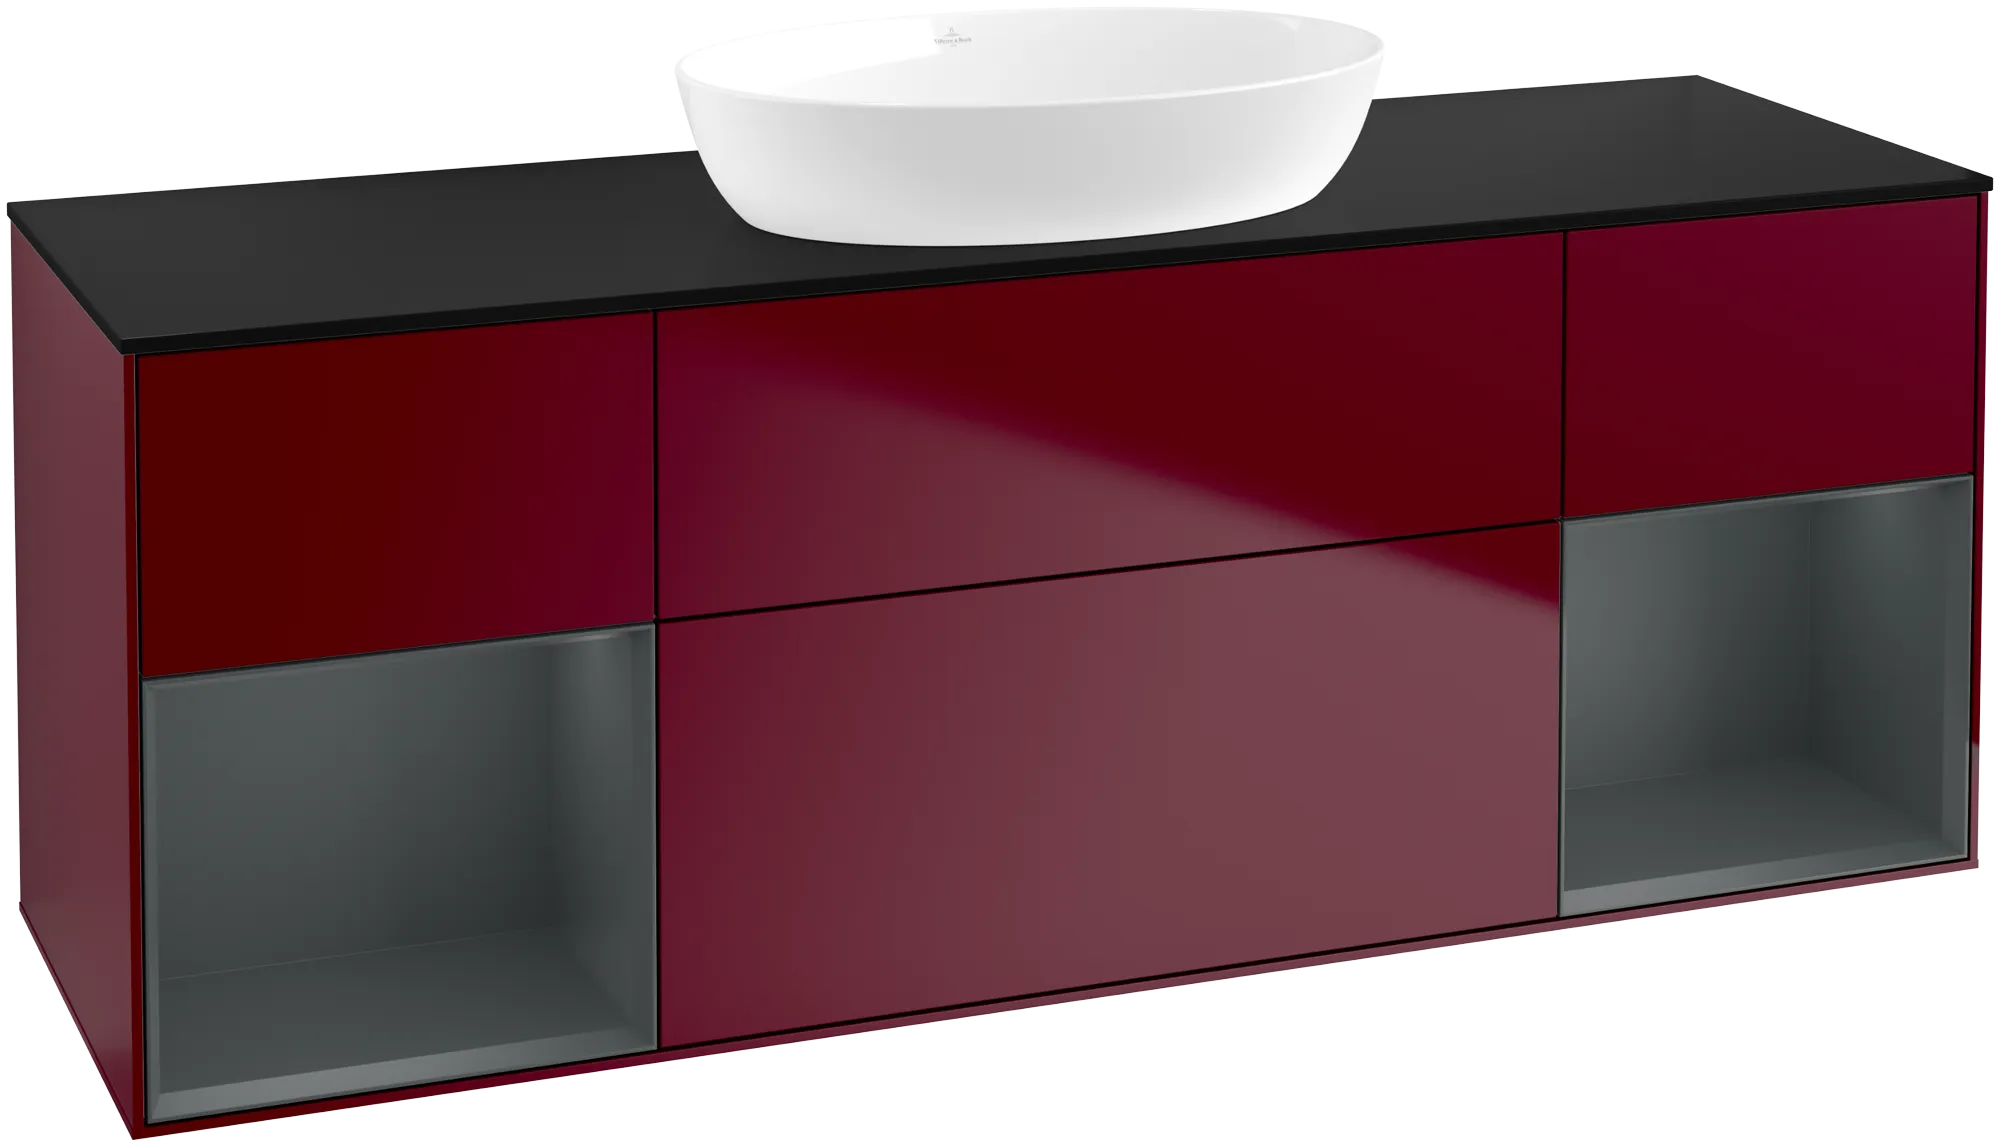 Picture of VILLEROY BOCH Finion Vanity unit, with lighting, 4 pull-out compartments, 1600 x 603 x 501 mm, Peony Matt Lacquer / Midnight Blue Matt Lacquer / Glass Black Matt #GD02HGHB